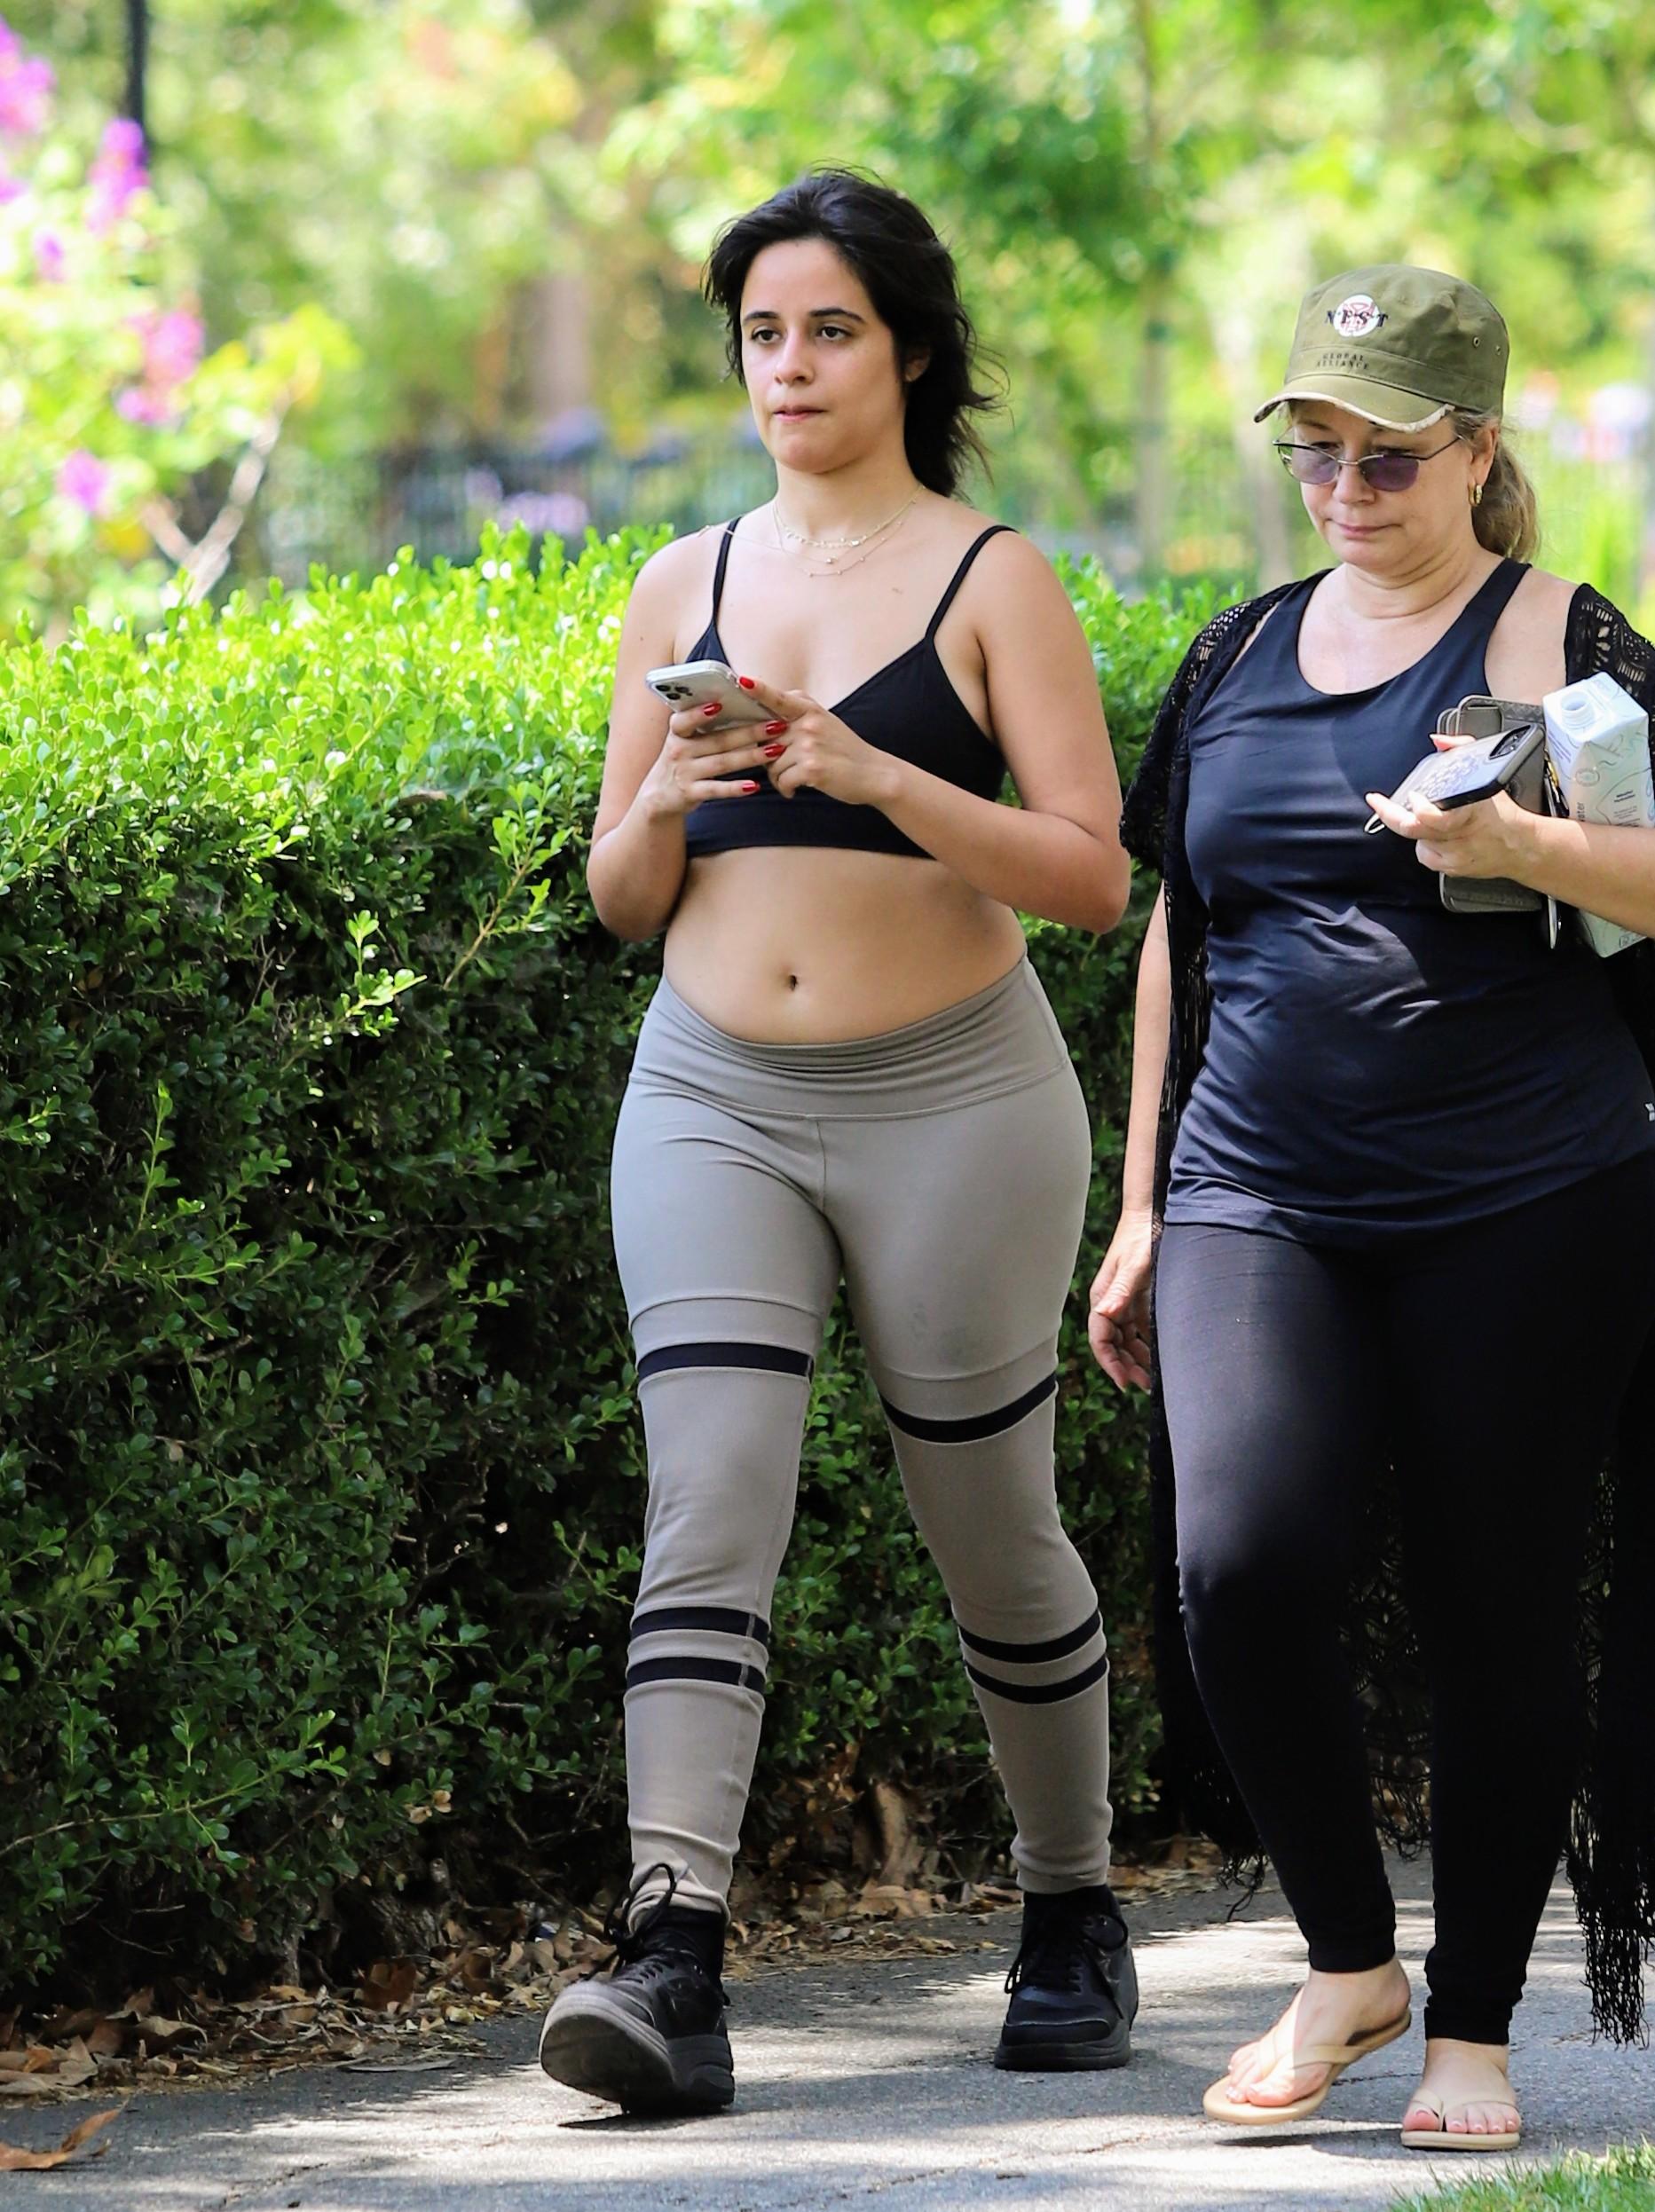 Camila Cabello seen getting excessive with her mother at the park in leggings and crop top. 16 Jul 2021 Pictured: Camila Cabello. Photo credit: APEX / MEGA TheMegaAgency.com +1 888 505 6342 (Mega Agency TagID: MEGA771689_001.jpg) [Photo via Mega Agency]